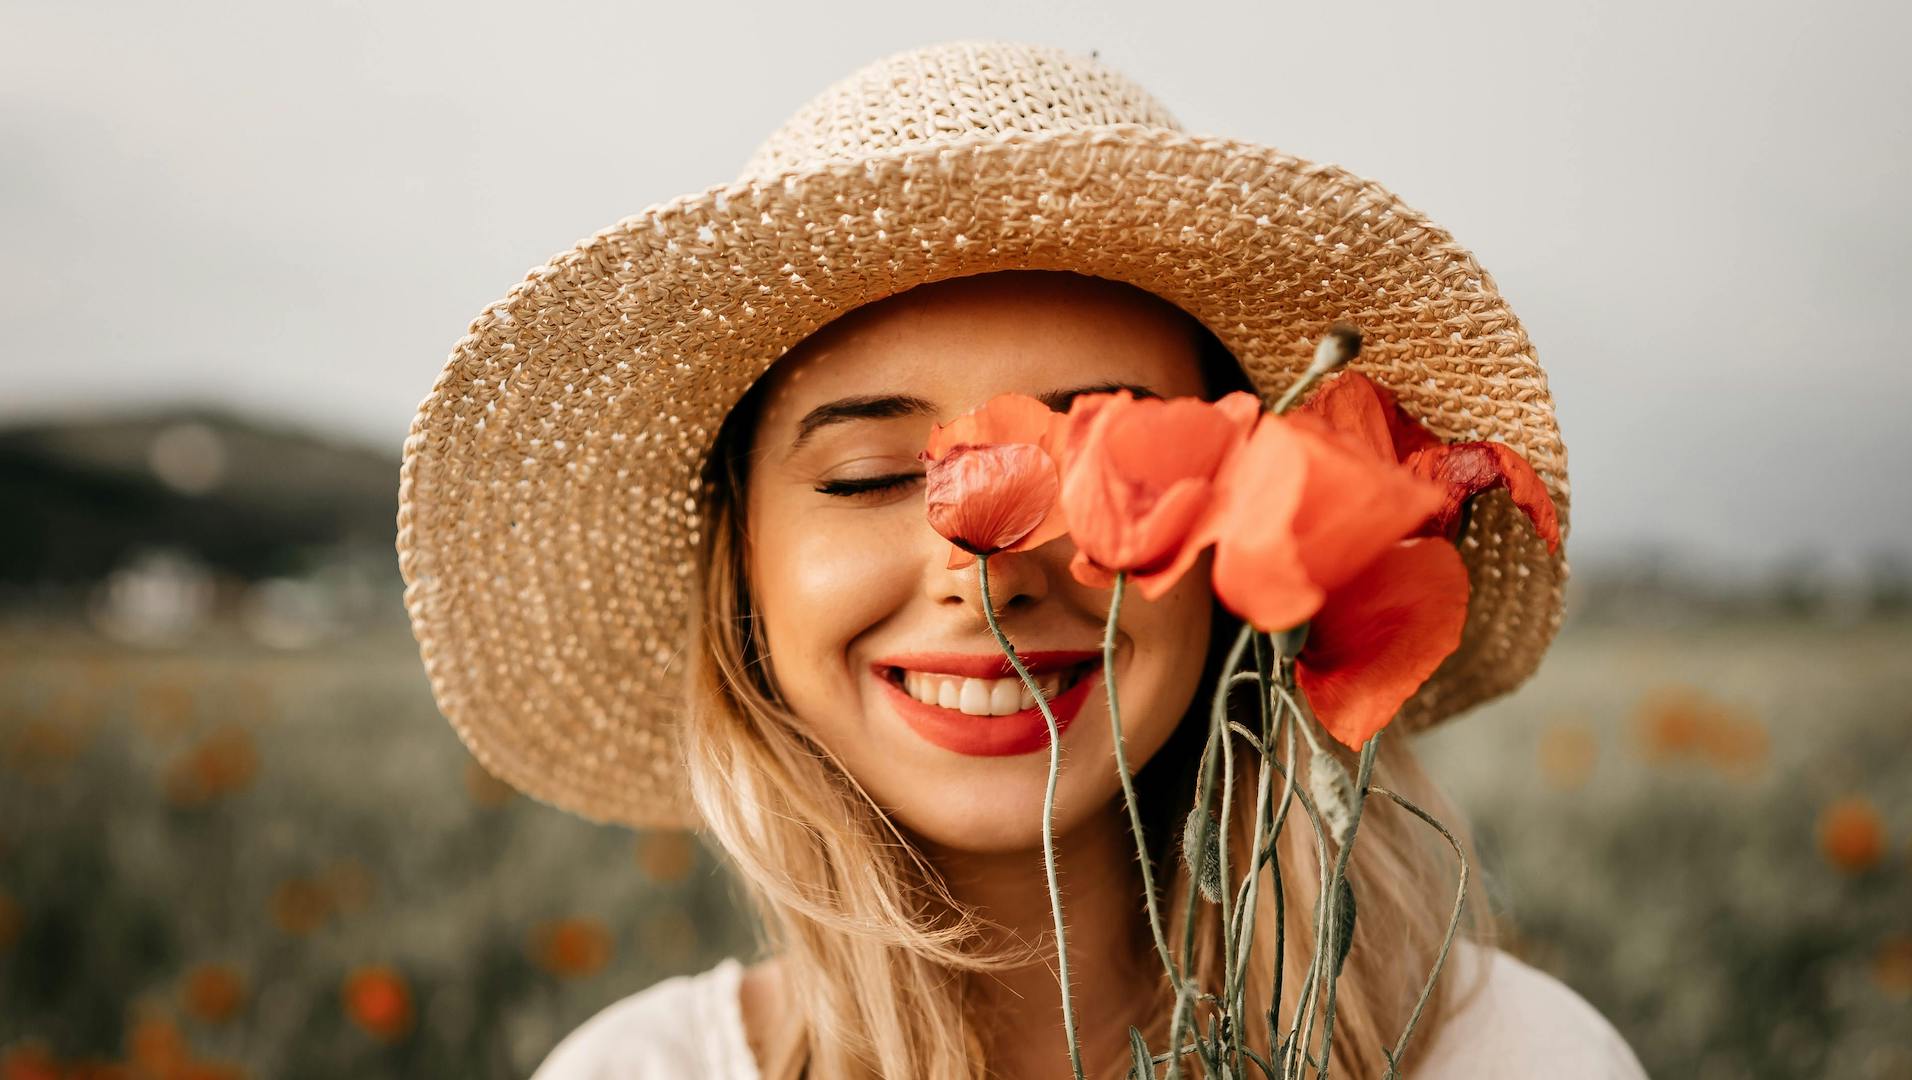 Gluten-Free Living: A young woman in a straw hat standing in a field, holding a bunch of orange tulips to her face, eyes closed and enjoying the moment.